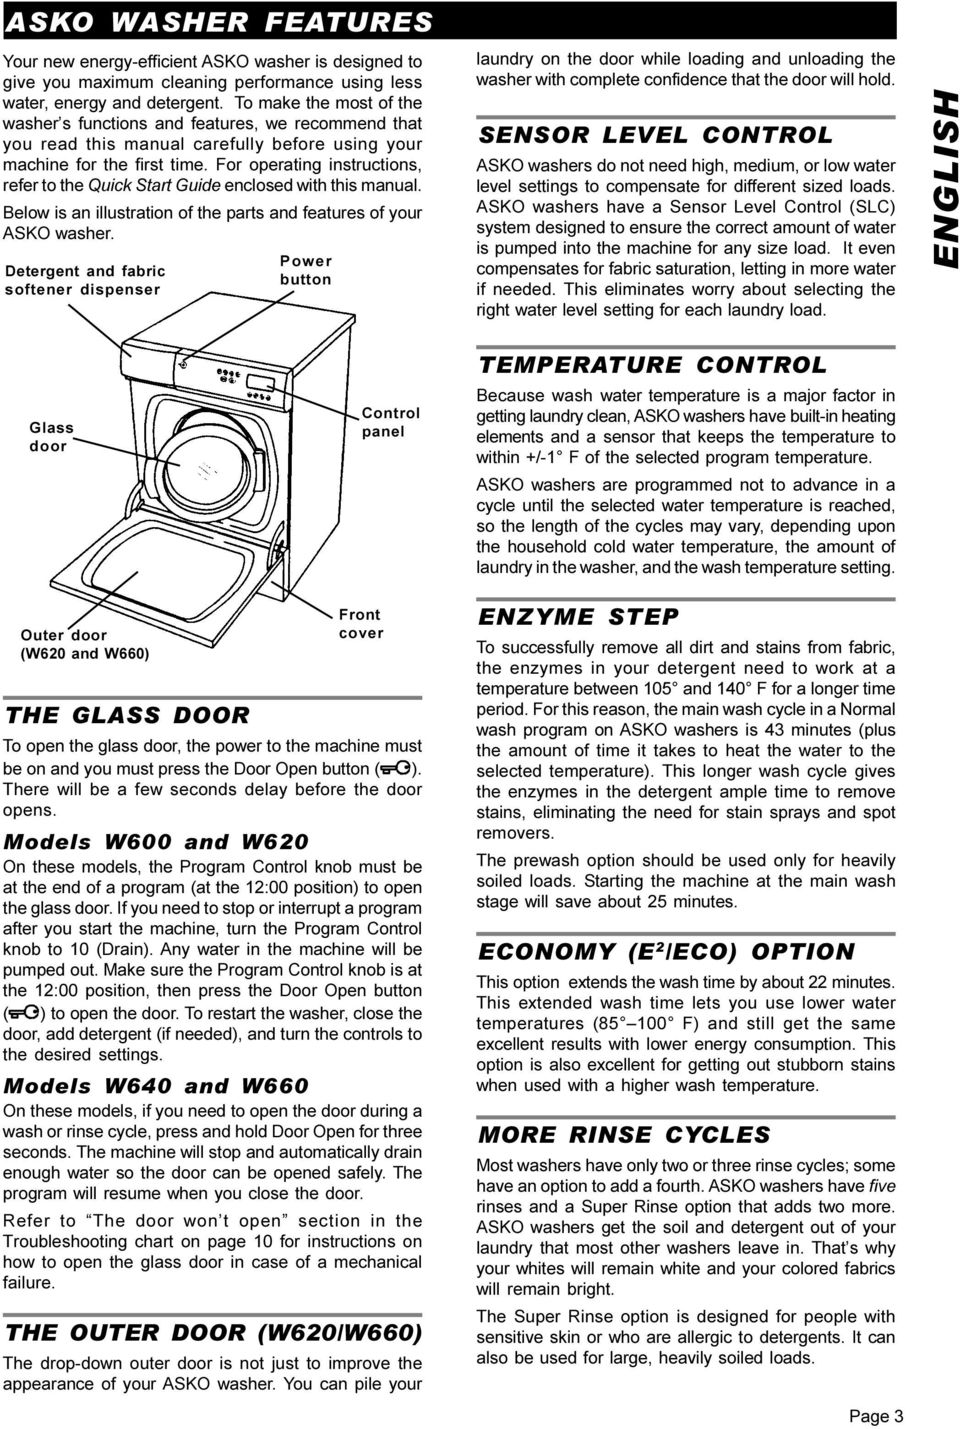 For operating instructions, refer to the Quick Start Guide enclosed with this manual. Below is an illustration of the parts and features of your ASKO washer.